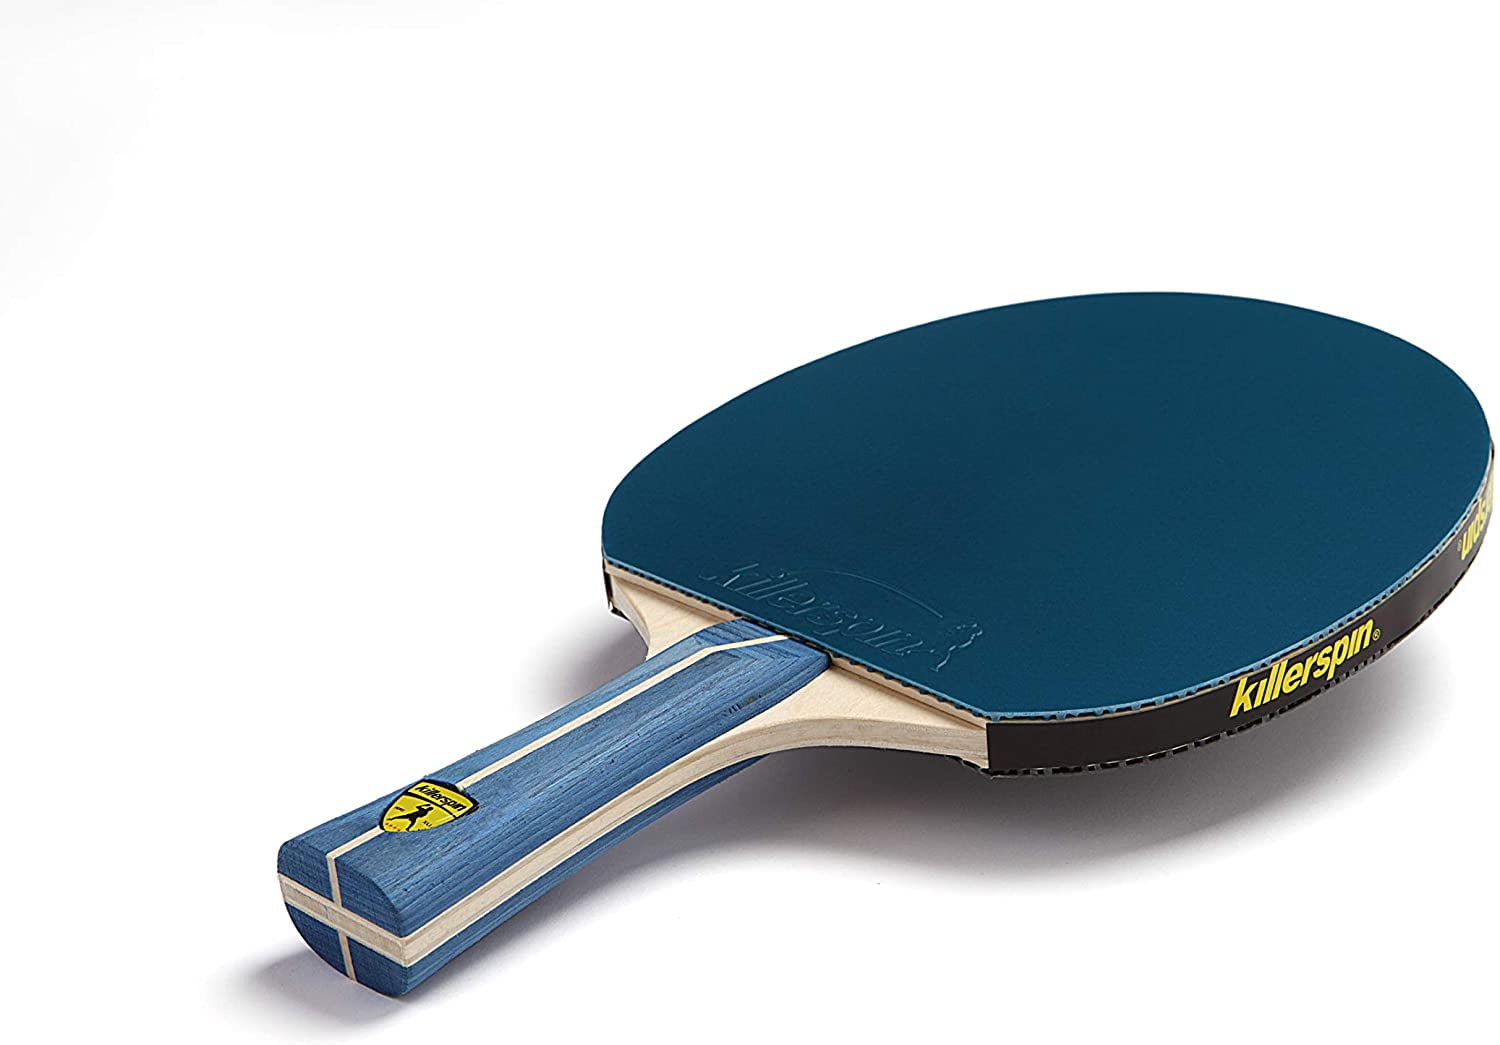 BRAND New Stiga ping pong paddle classic Purple/teal 5 ply blade 